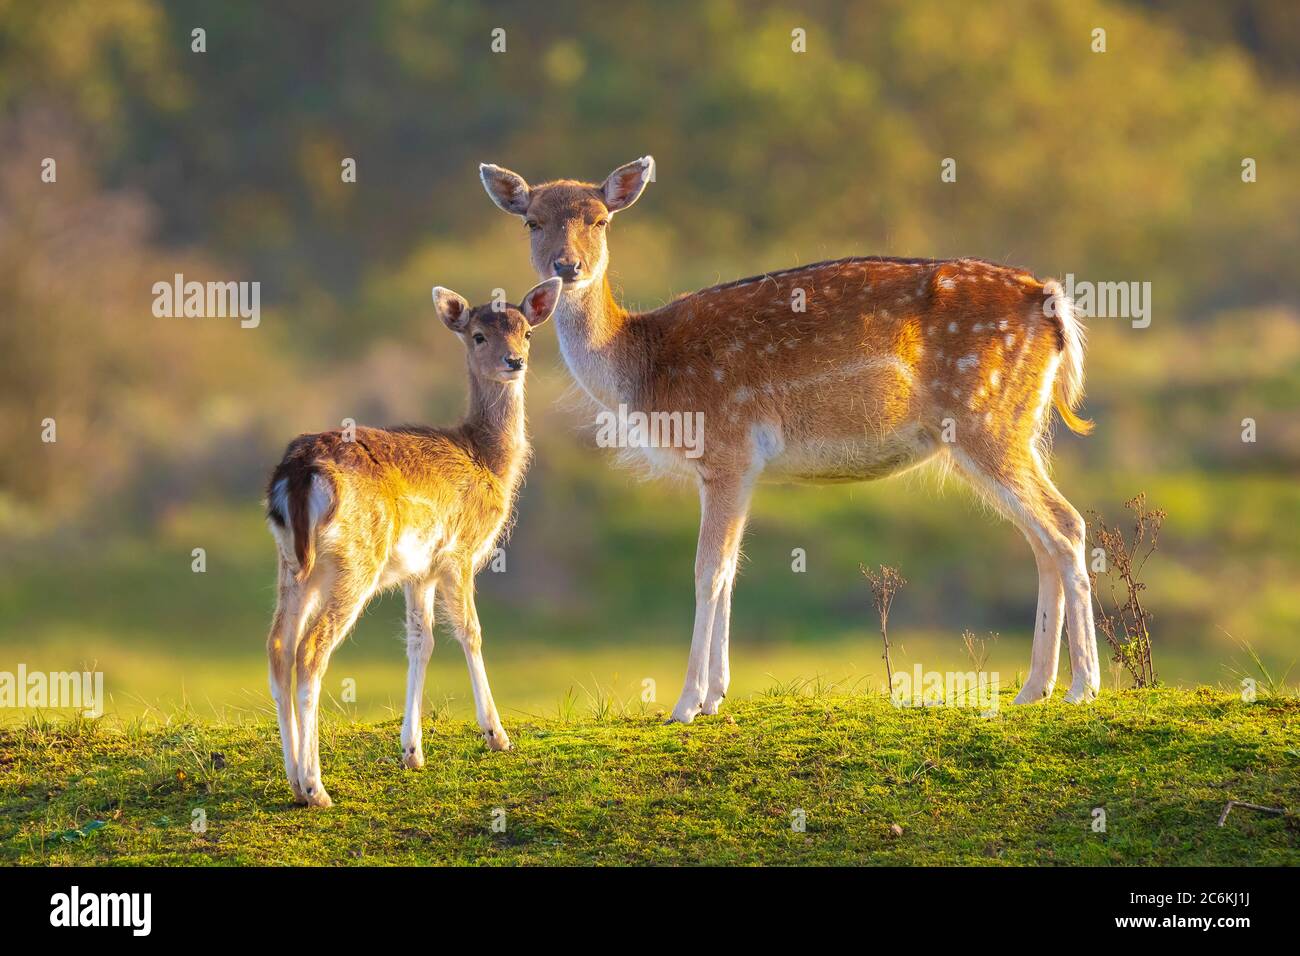 Fallow deer Dama Dama fawn in Autumn season. The Autumn fog and nature colors are clearly visible on the background. Stock Photo